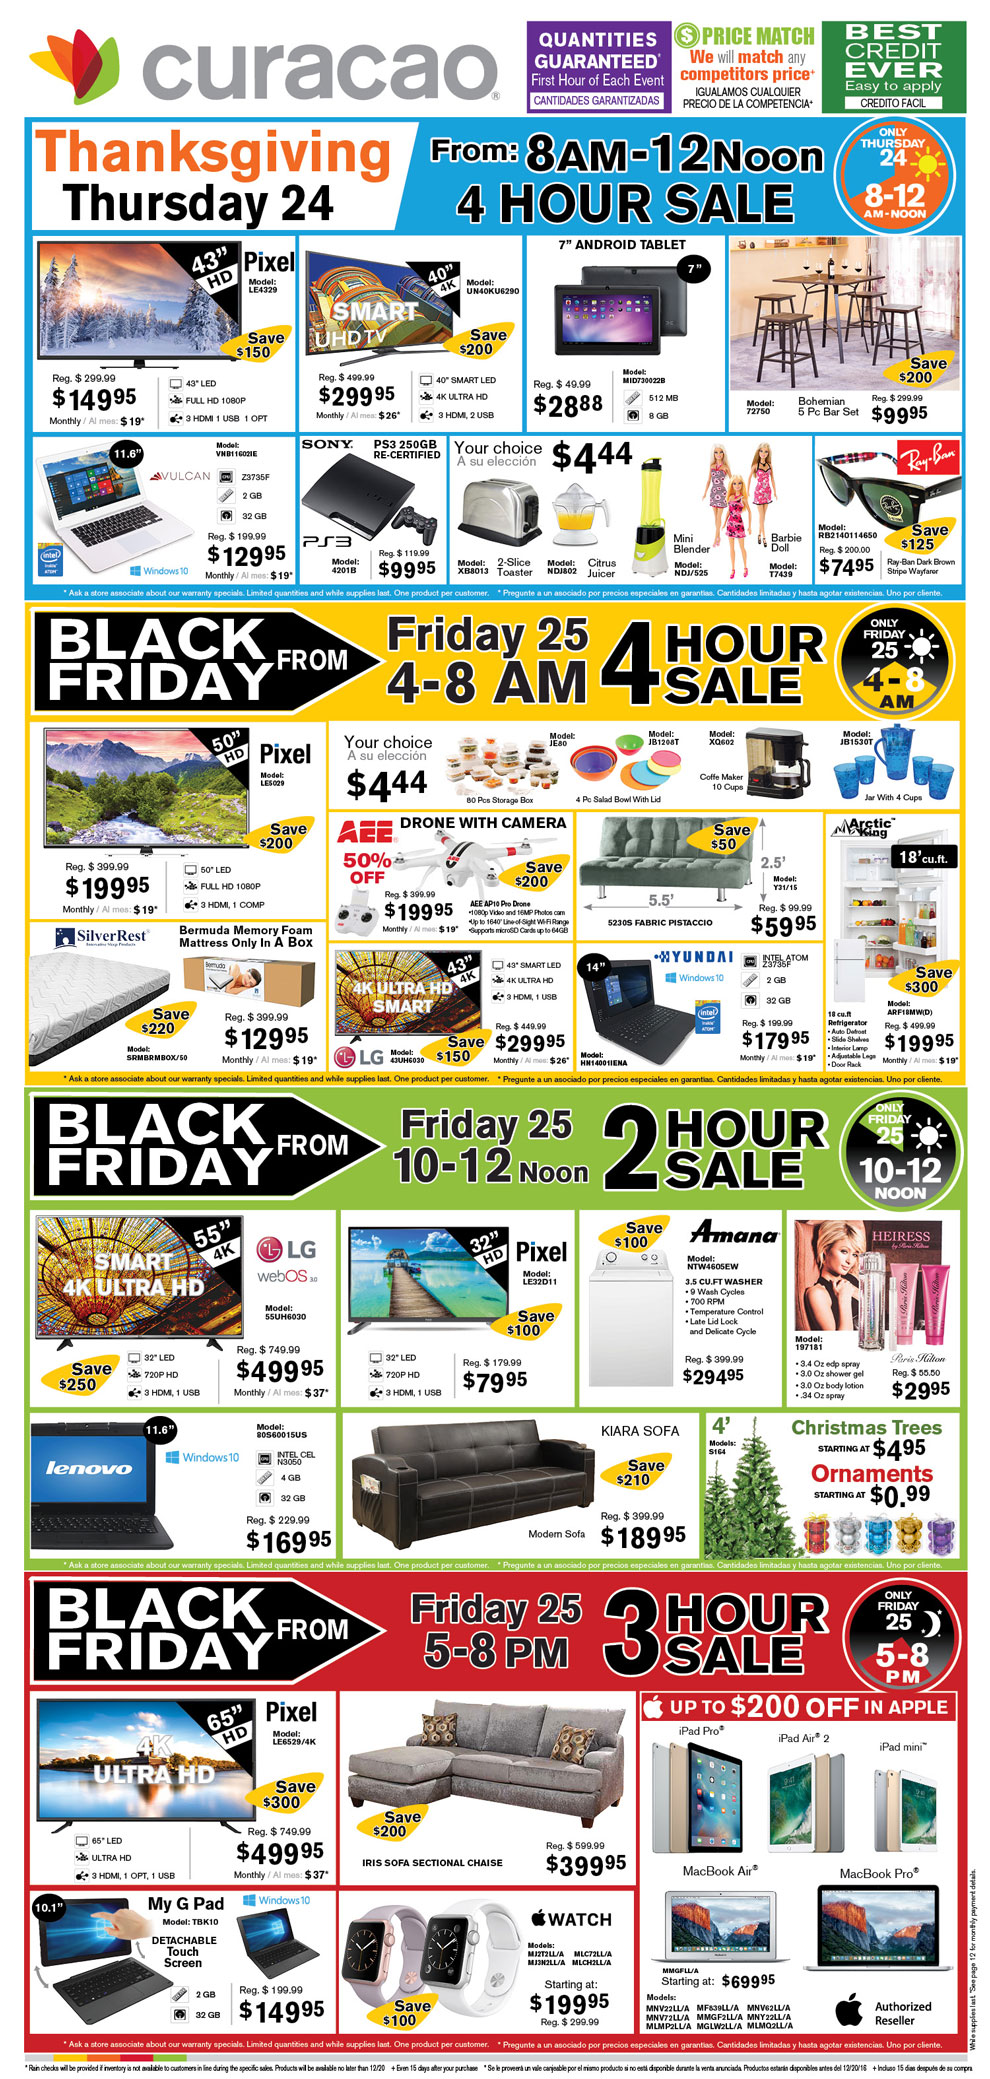 Curacao 2016 Black Friday Ad Page 1